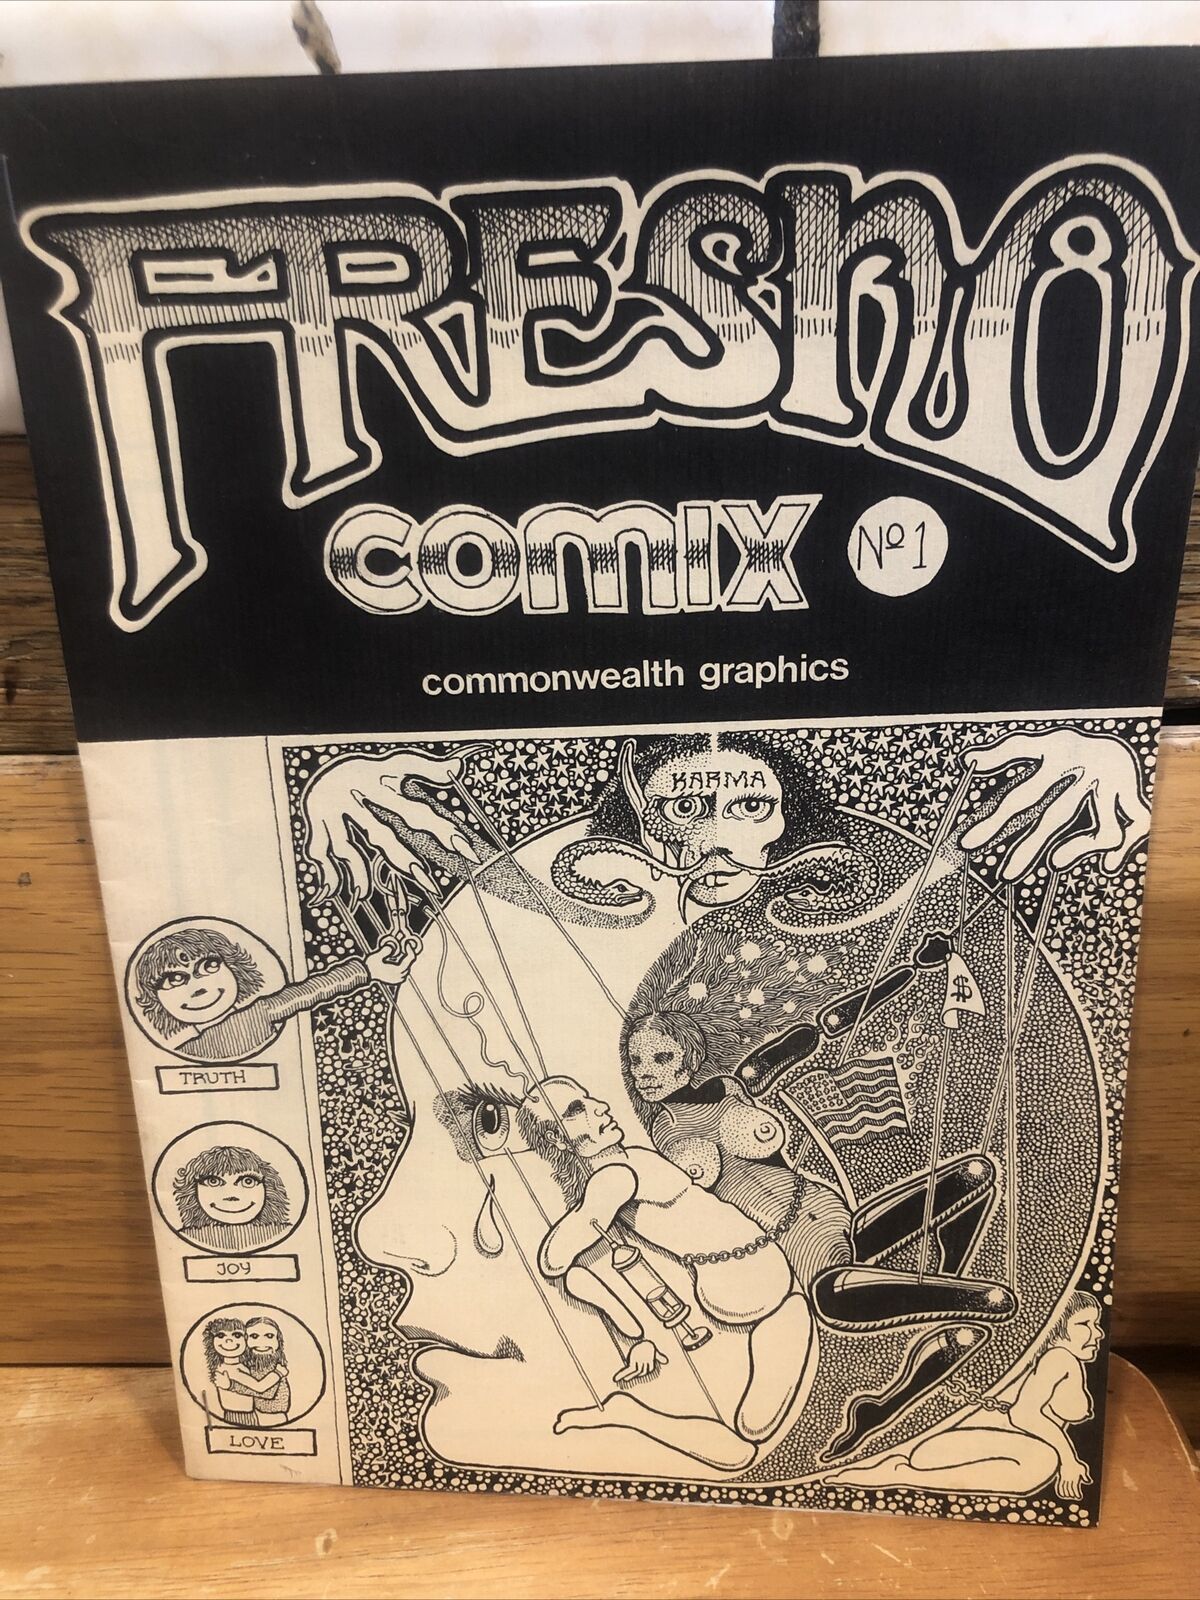 John Thompson Fresno comics #1 limited edition... Signed an inscribed￼￼￼rare